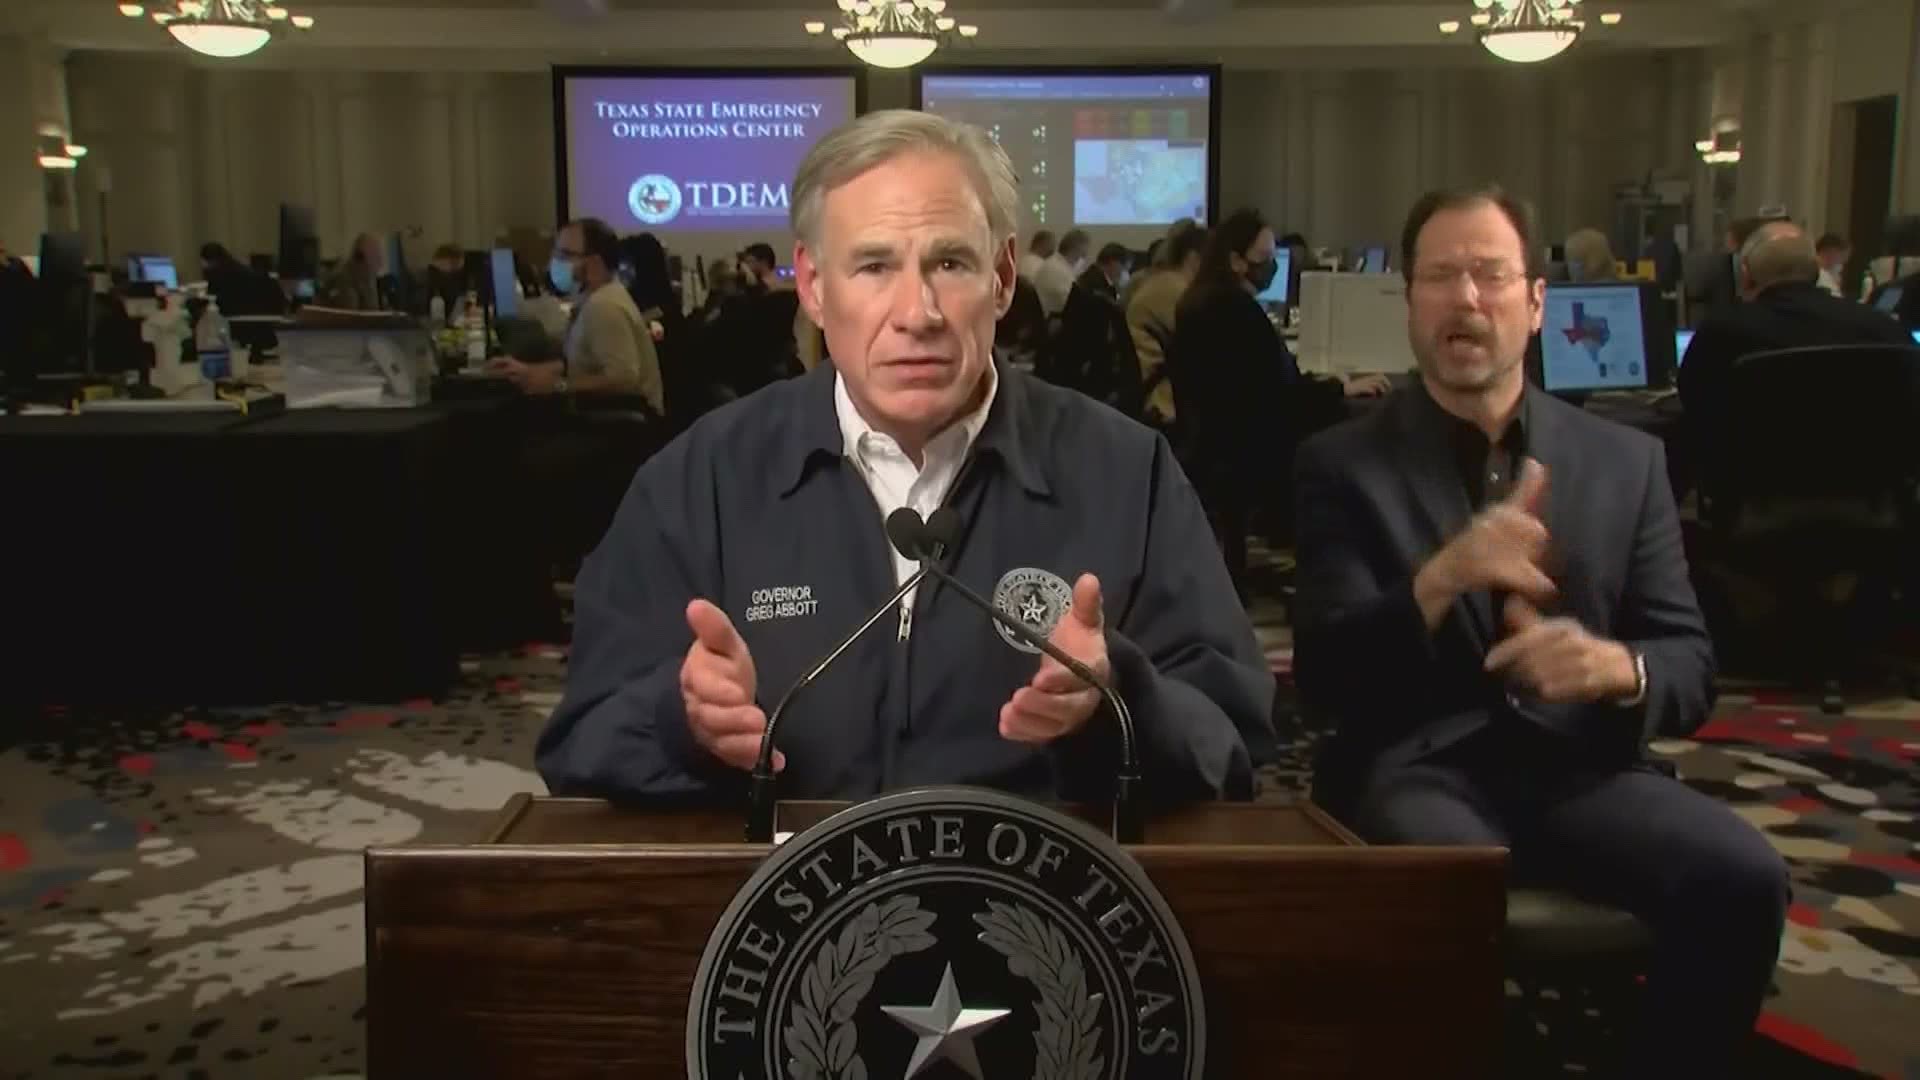 Texas Gov. Greg Abbott held a statewide address to discuss the State's response to the winter storms, promising many upcoming actions from Texas lawmakers.